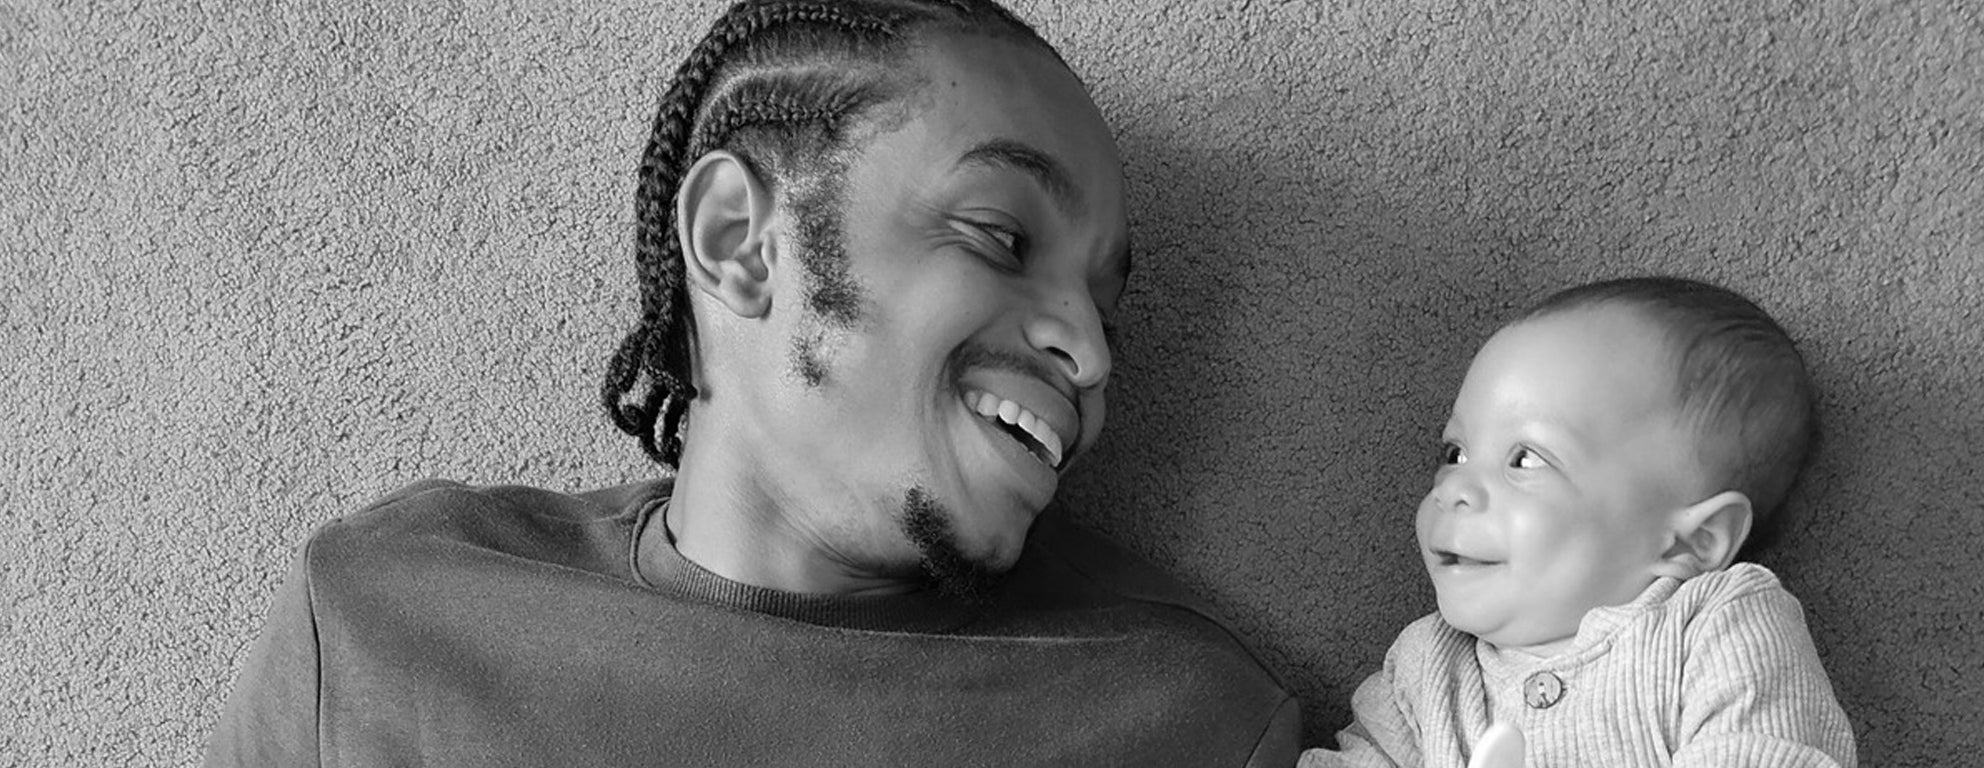 Black and white photo of a Black man and a baby lying on their backs, laughing with each other